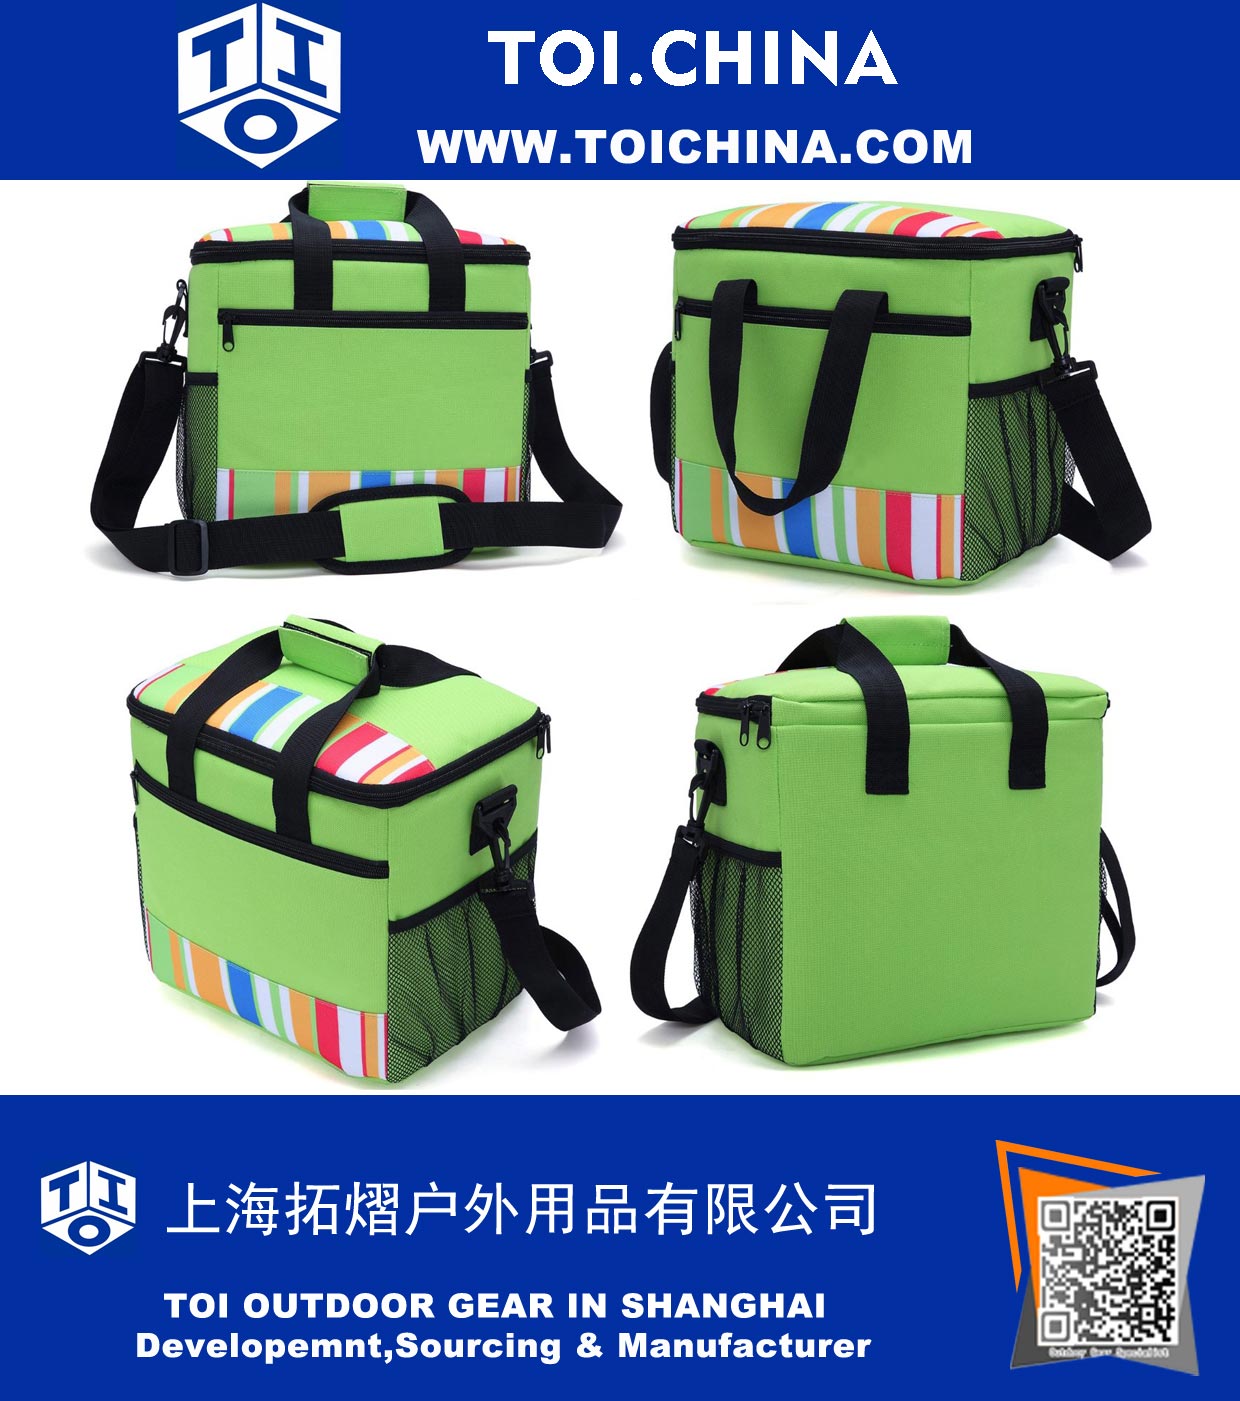 24-can Large Capacity Soft Cooler Tote Insulated Lunch Bag Green Stripe Outdoor Picnic Bag